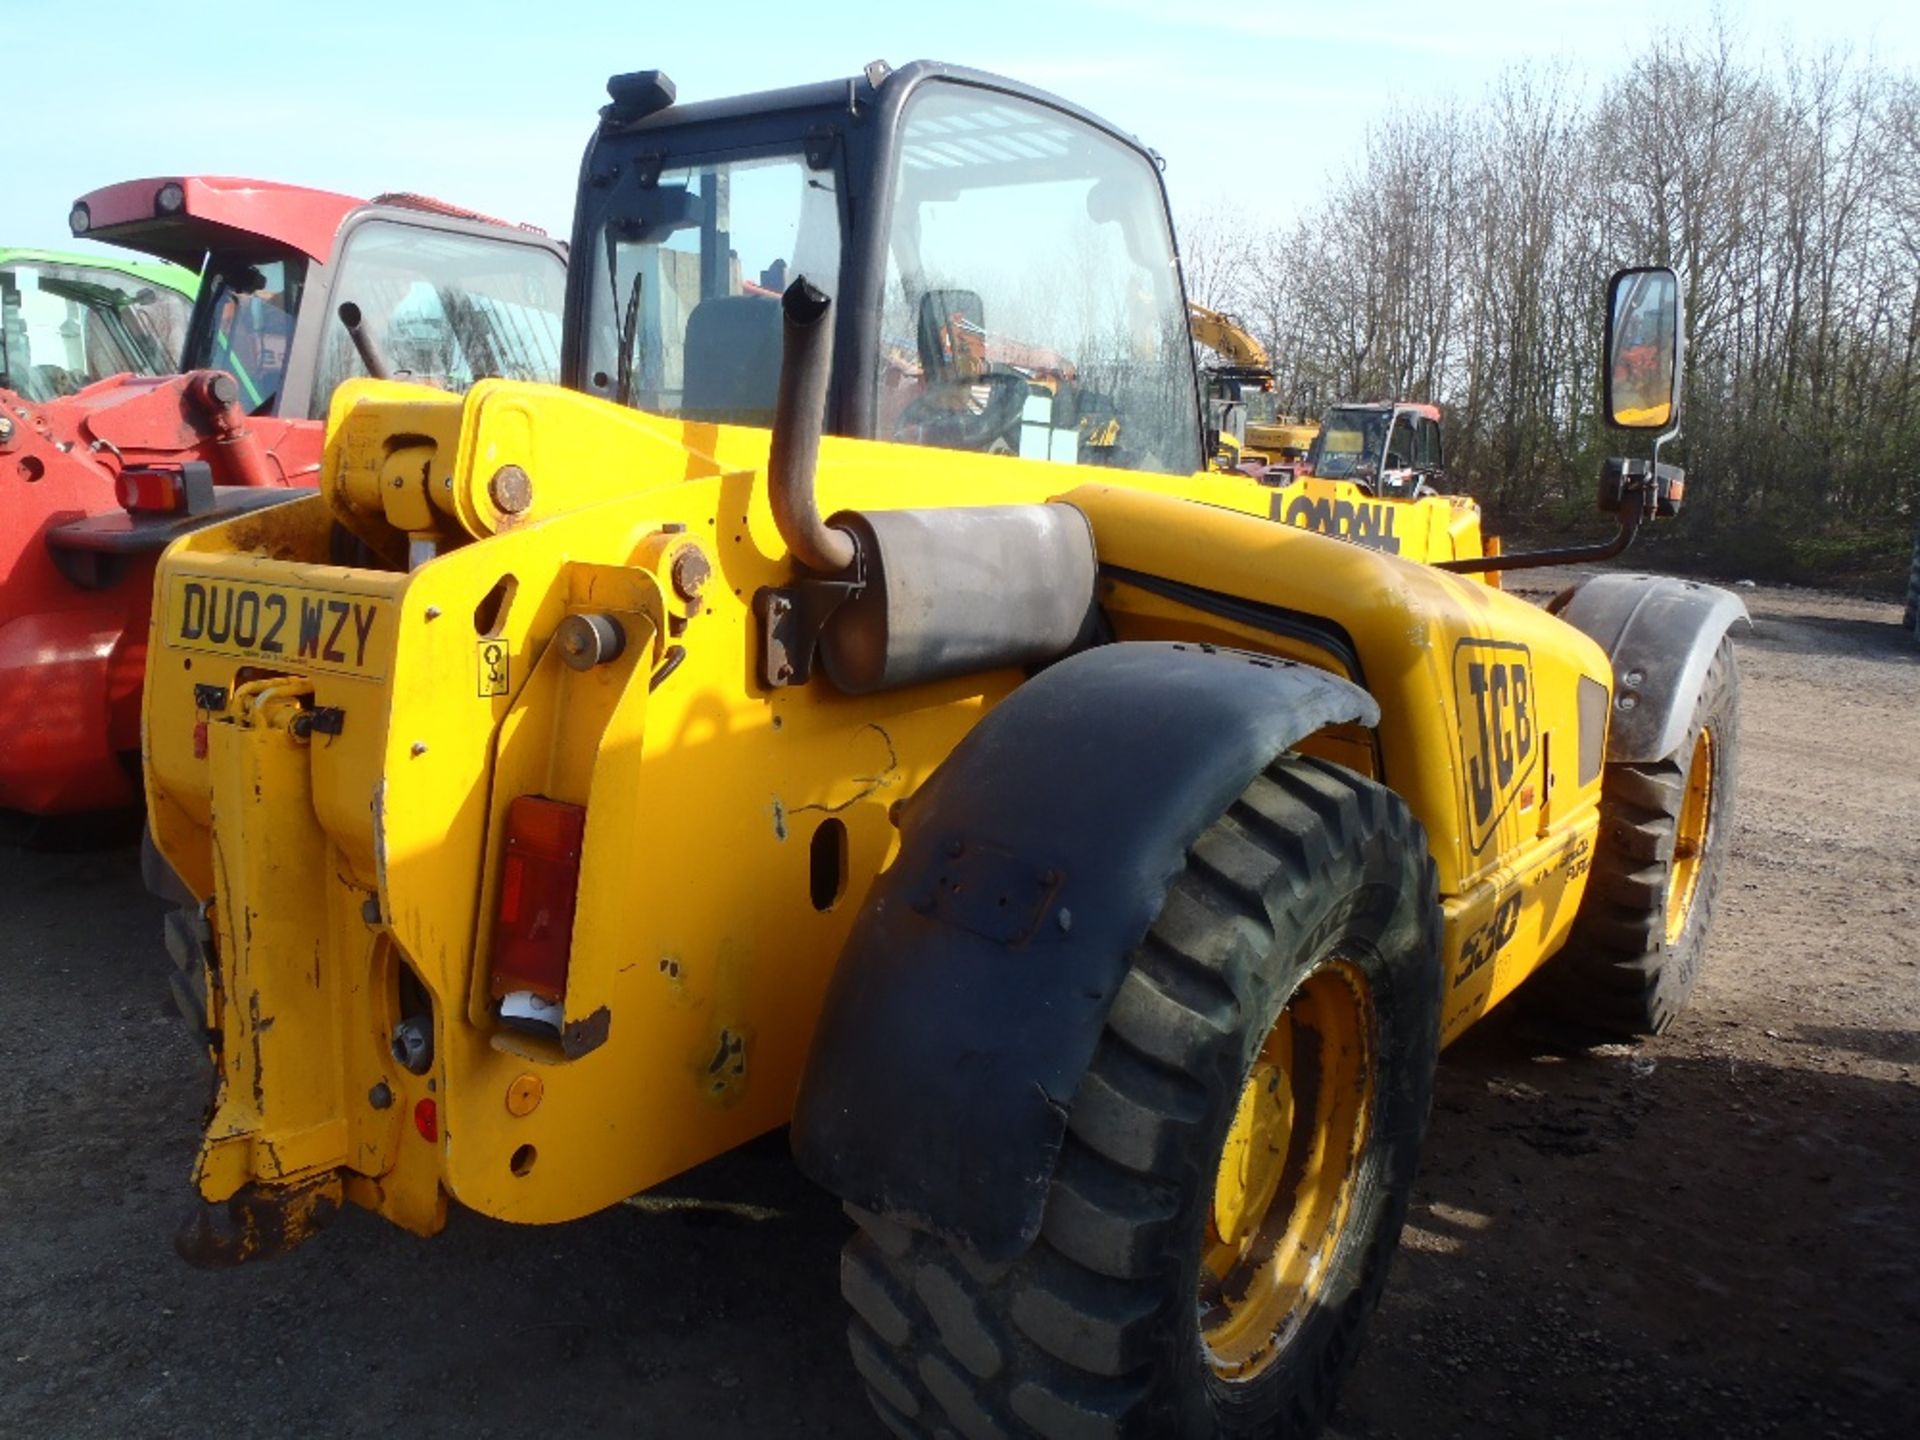 JCB 530-70 FS Loadall with Pallet Tines. V5 will be supplied. Reg No. DU02 WZY - Image 4 of 4